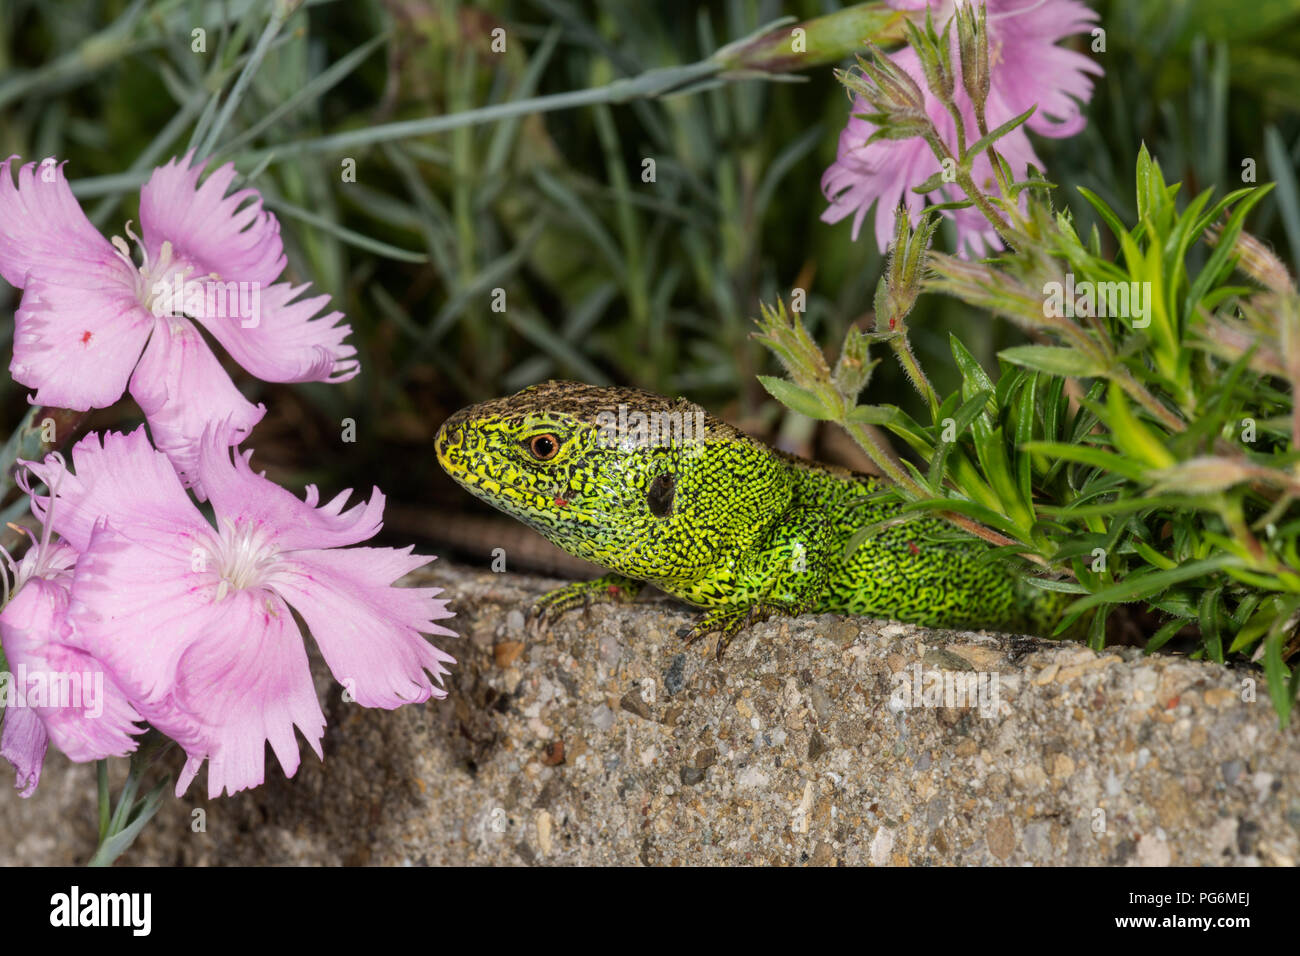 Sand lizard (Lacerta agilis), male on wall between Cheddar pinks, Baden-Württemberg, Germany Stock Photo